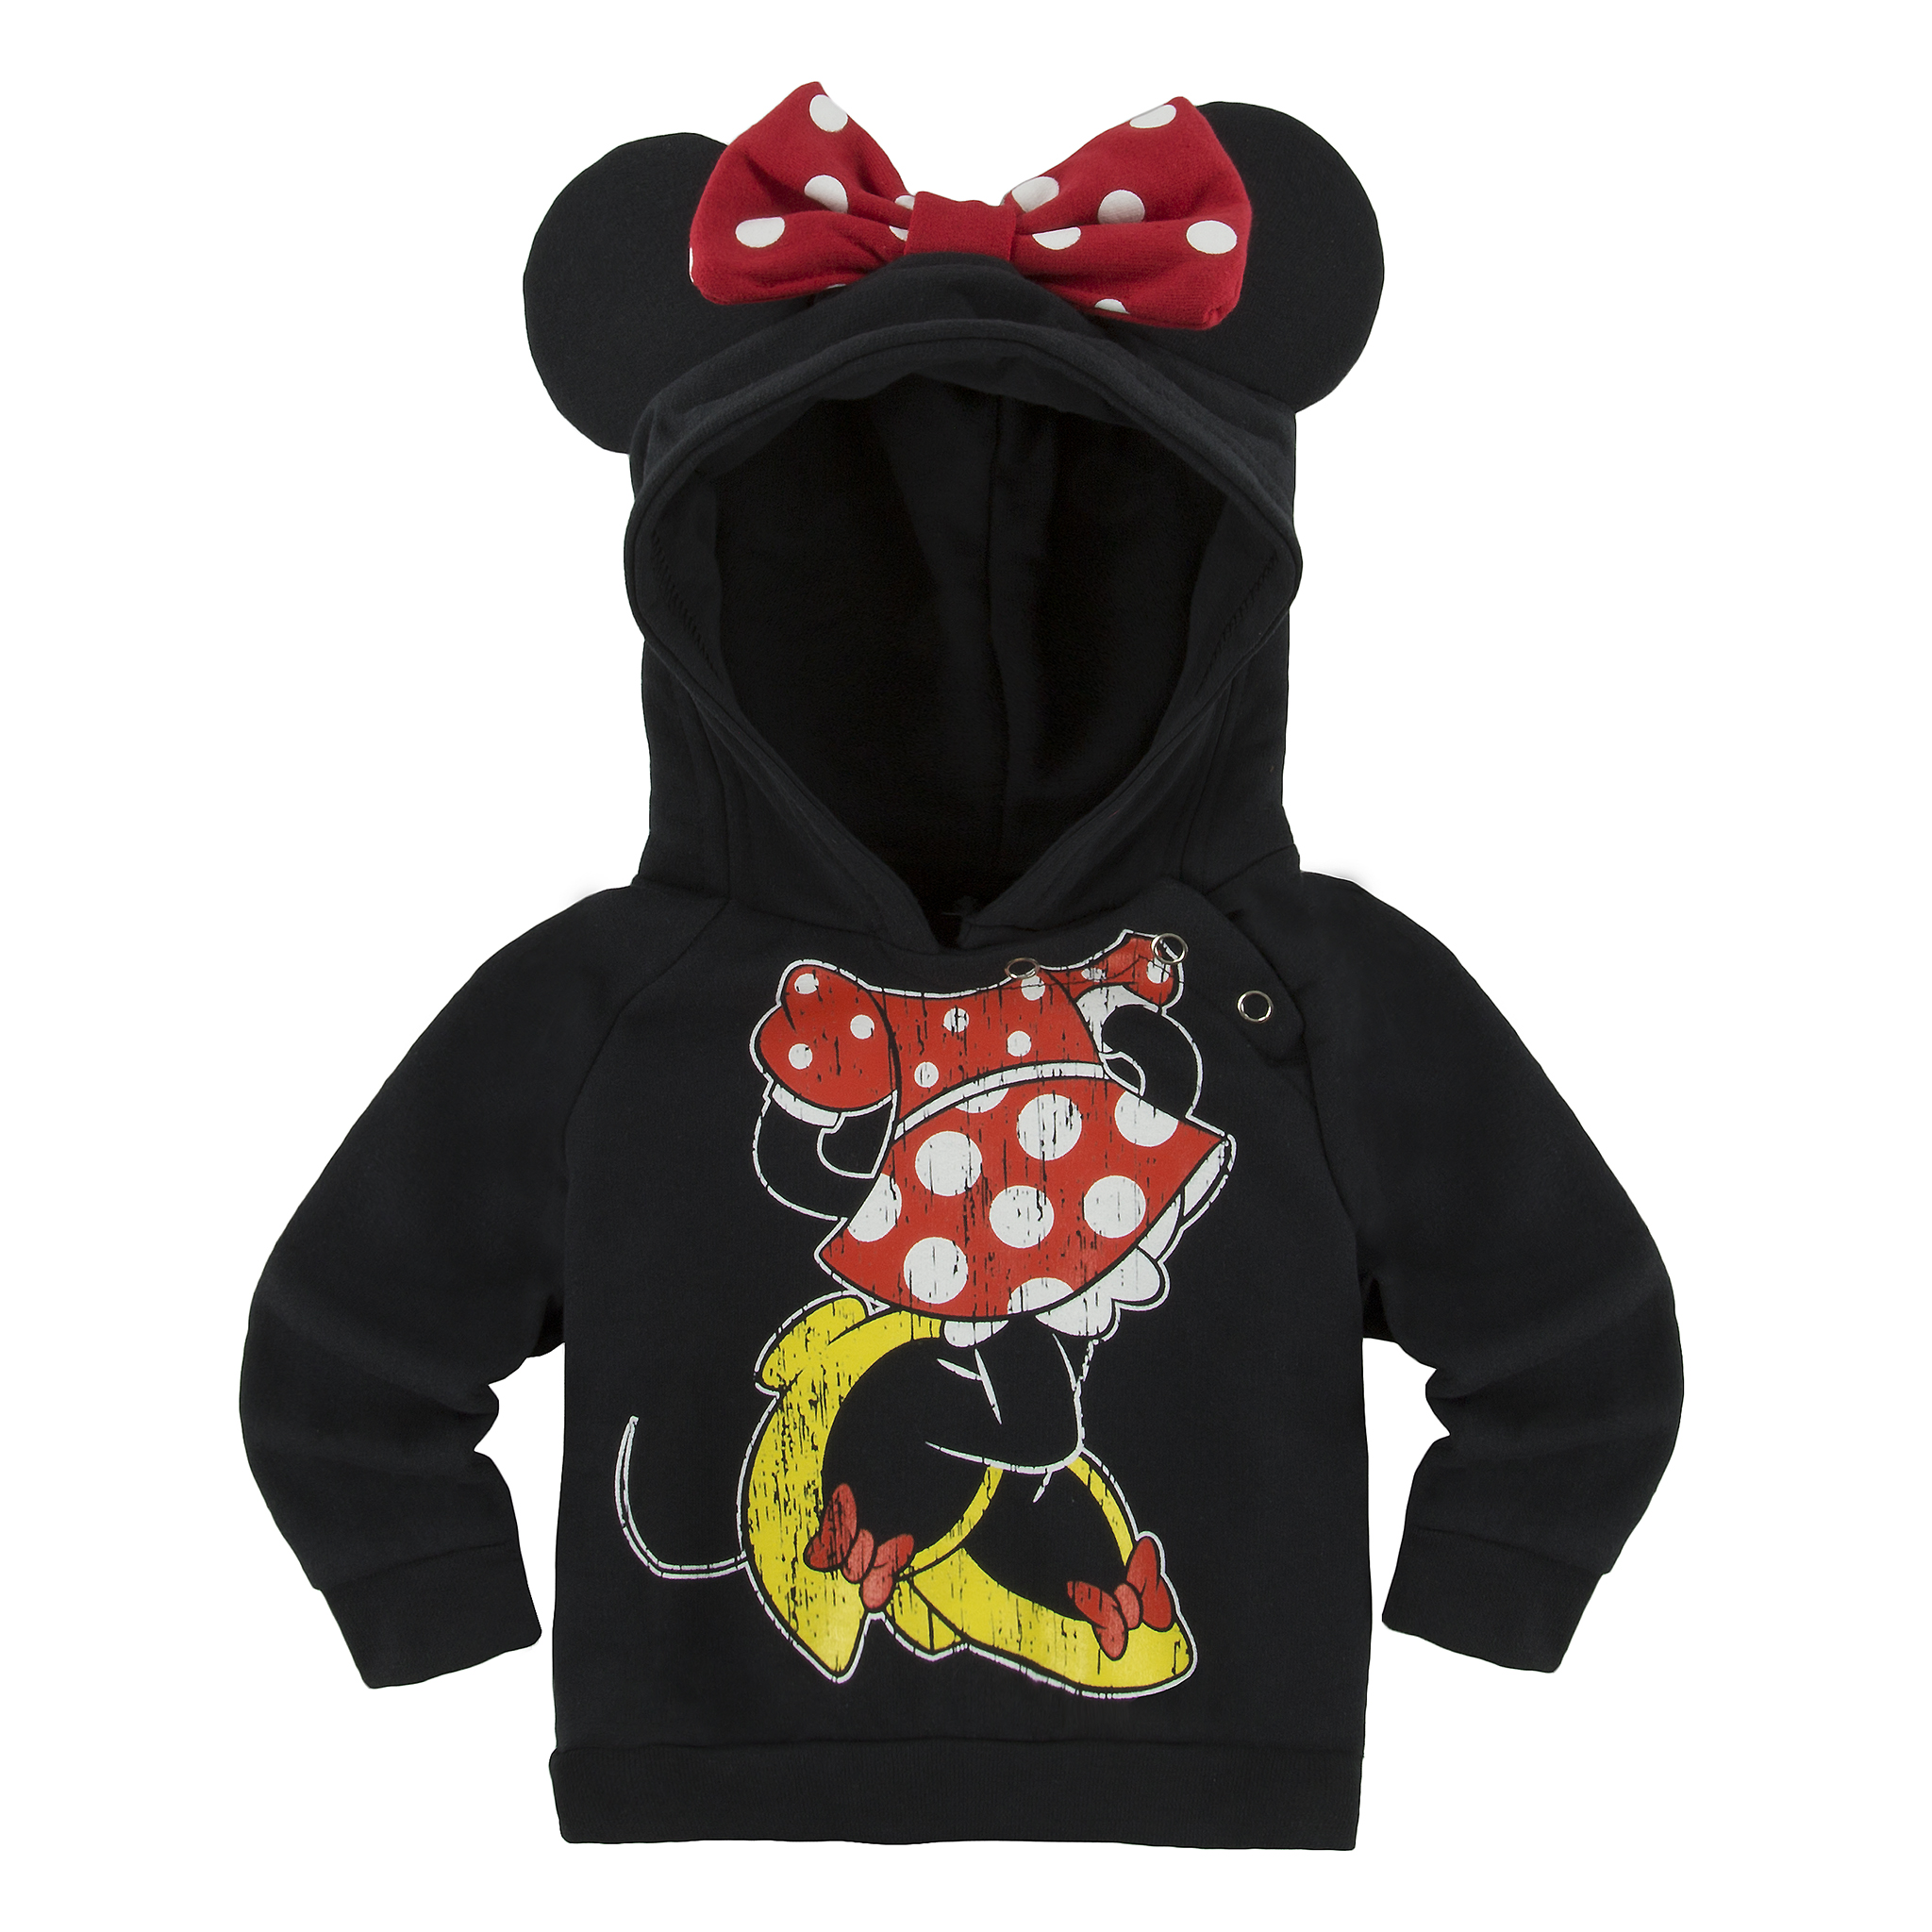 Minnie and Mickey Mouse infant hoodie sweatshirts